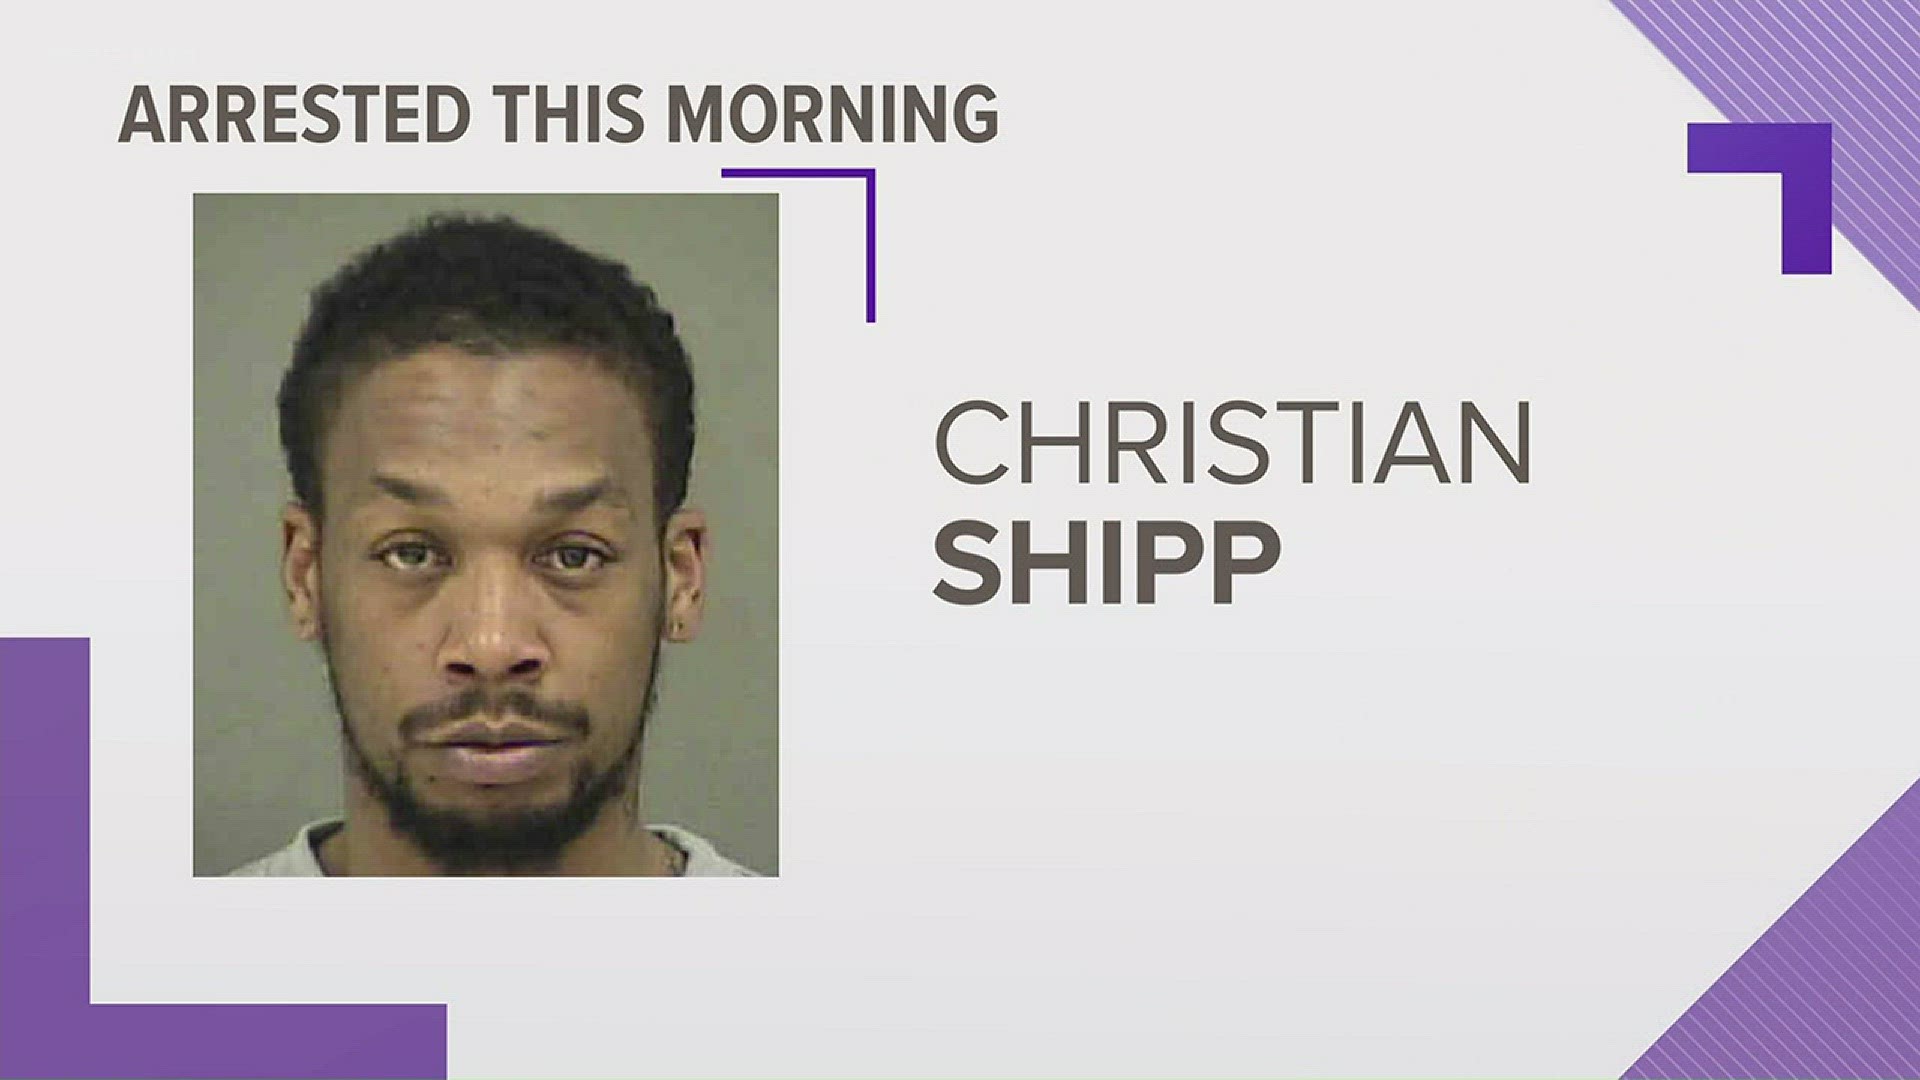 CMPD arrested a man who is suspected of kidnapping a woman and stealing her car Saturday morning.